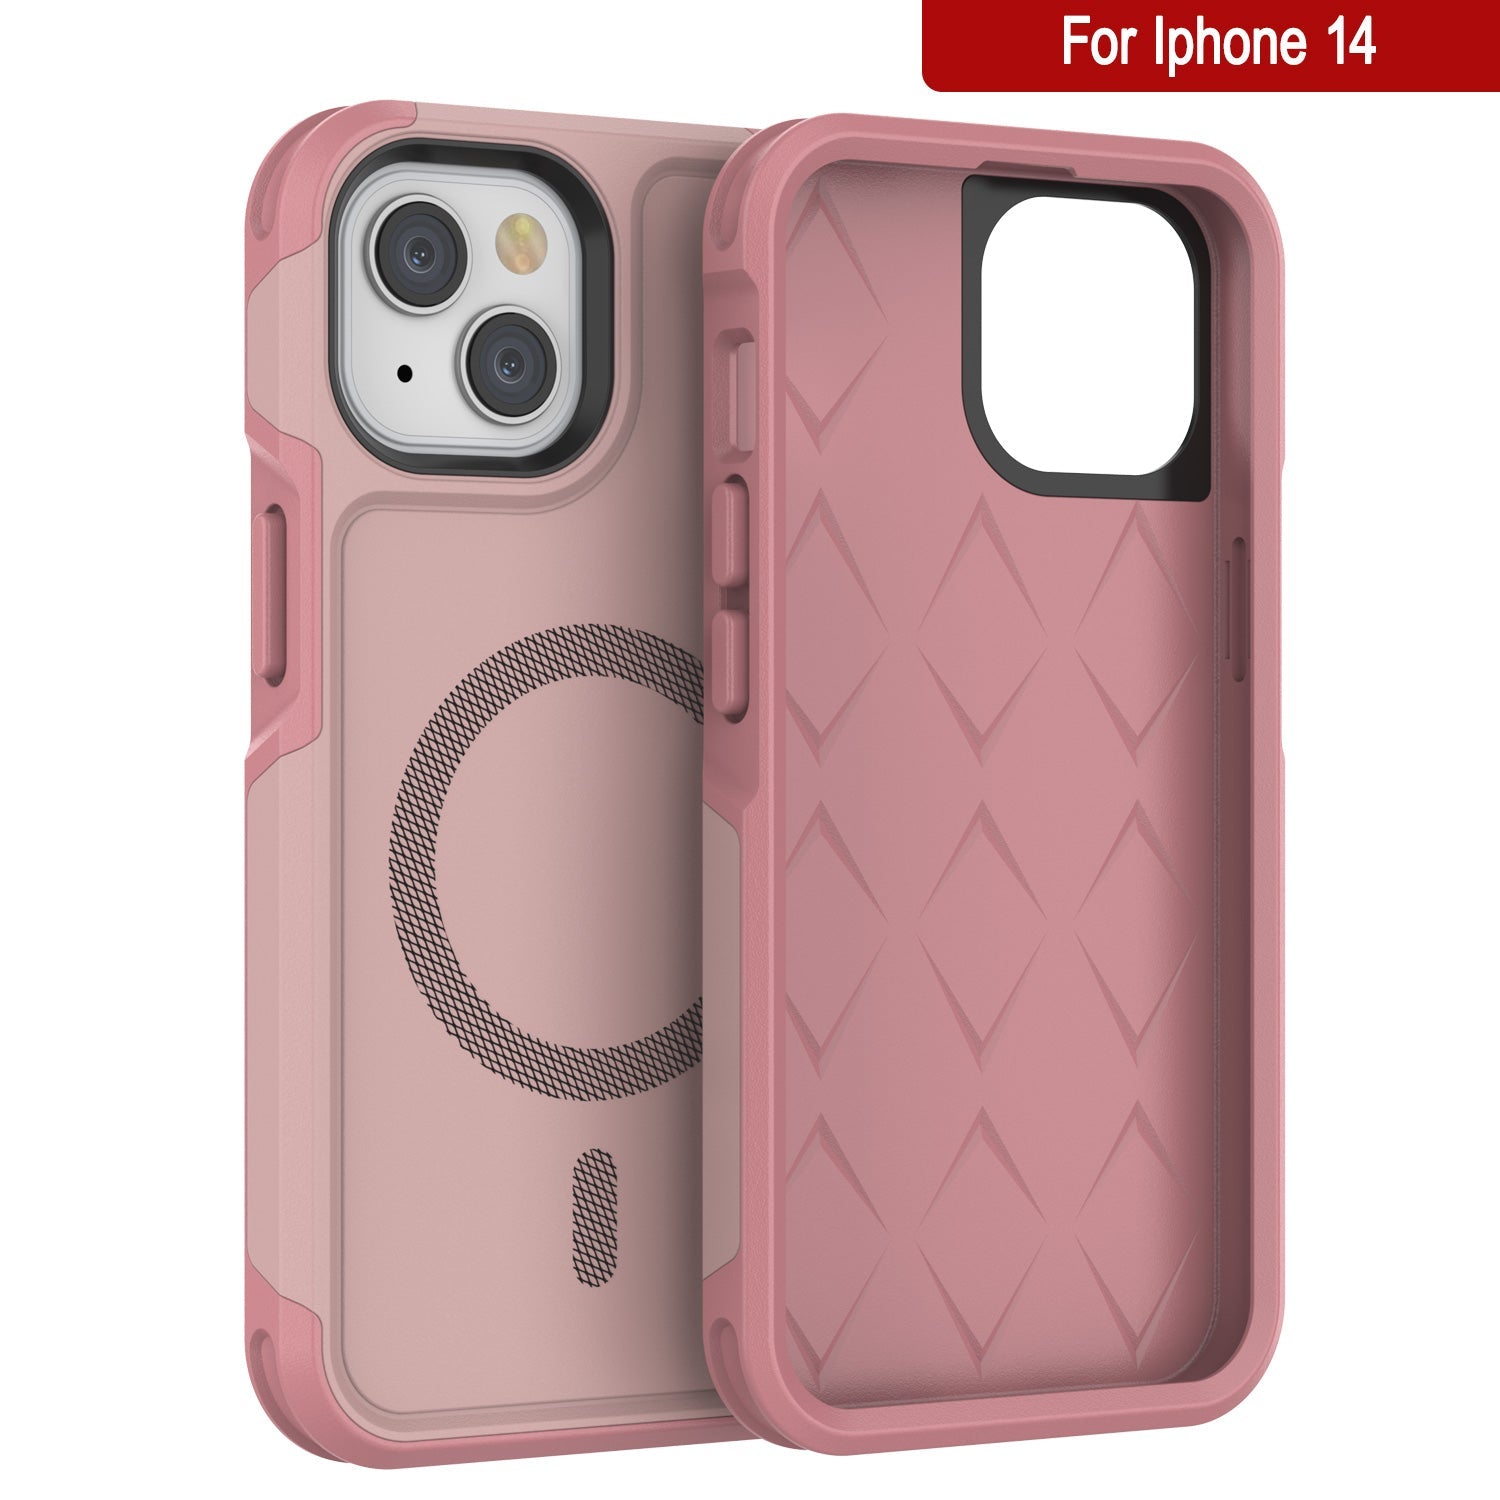 PunkCase iPhone 14 Case, [Spartan 2.0 Series] Clear Rugged Heavy Duty Cover W/Built in Screen Protector [Pink]